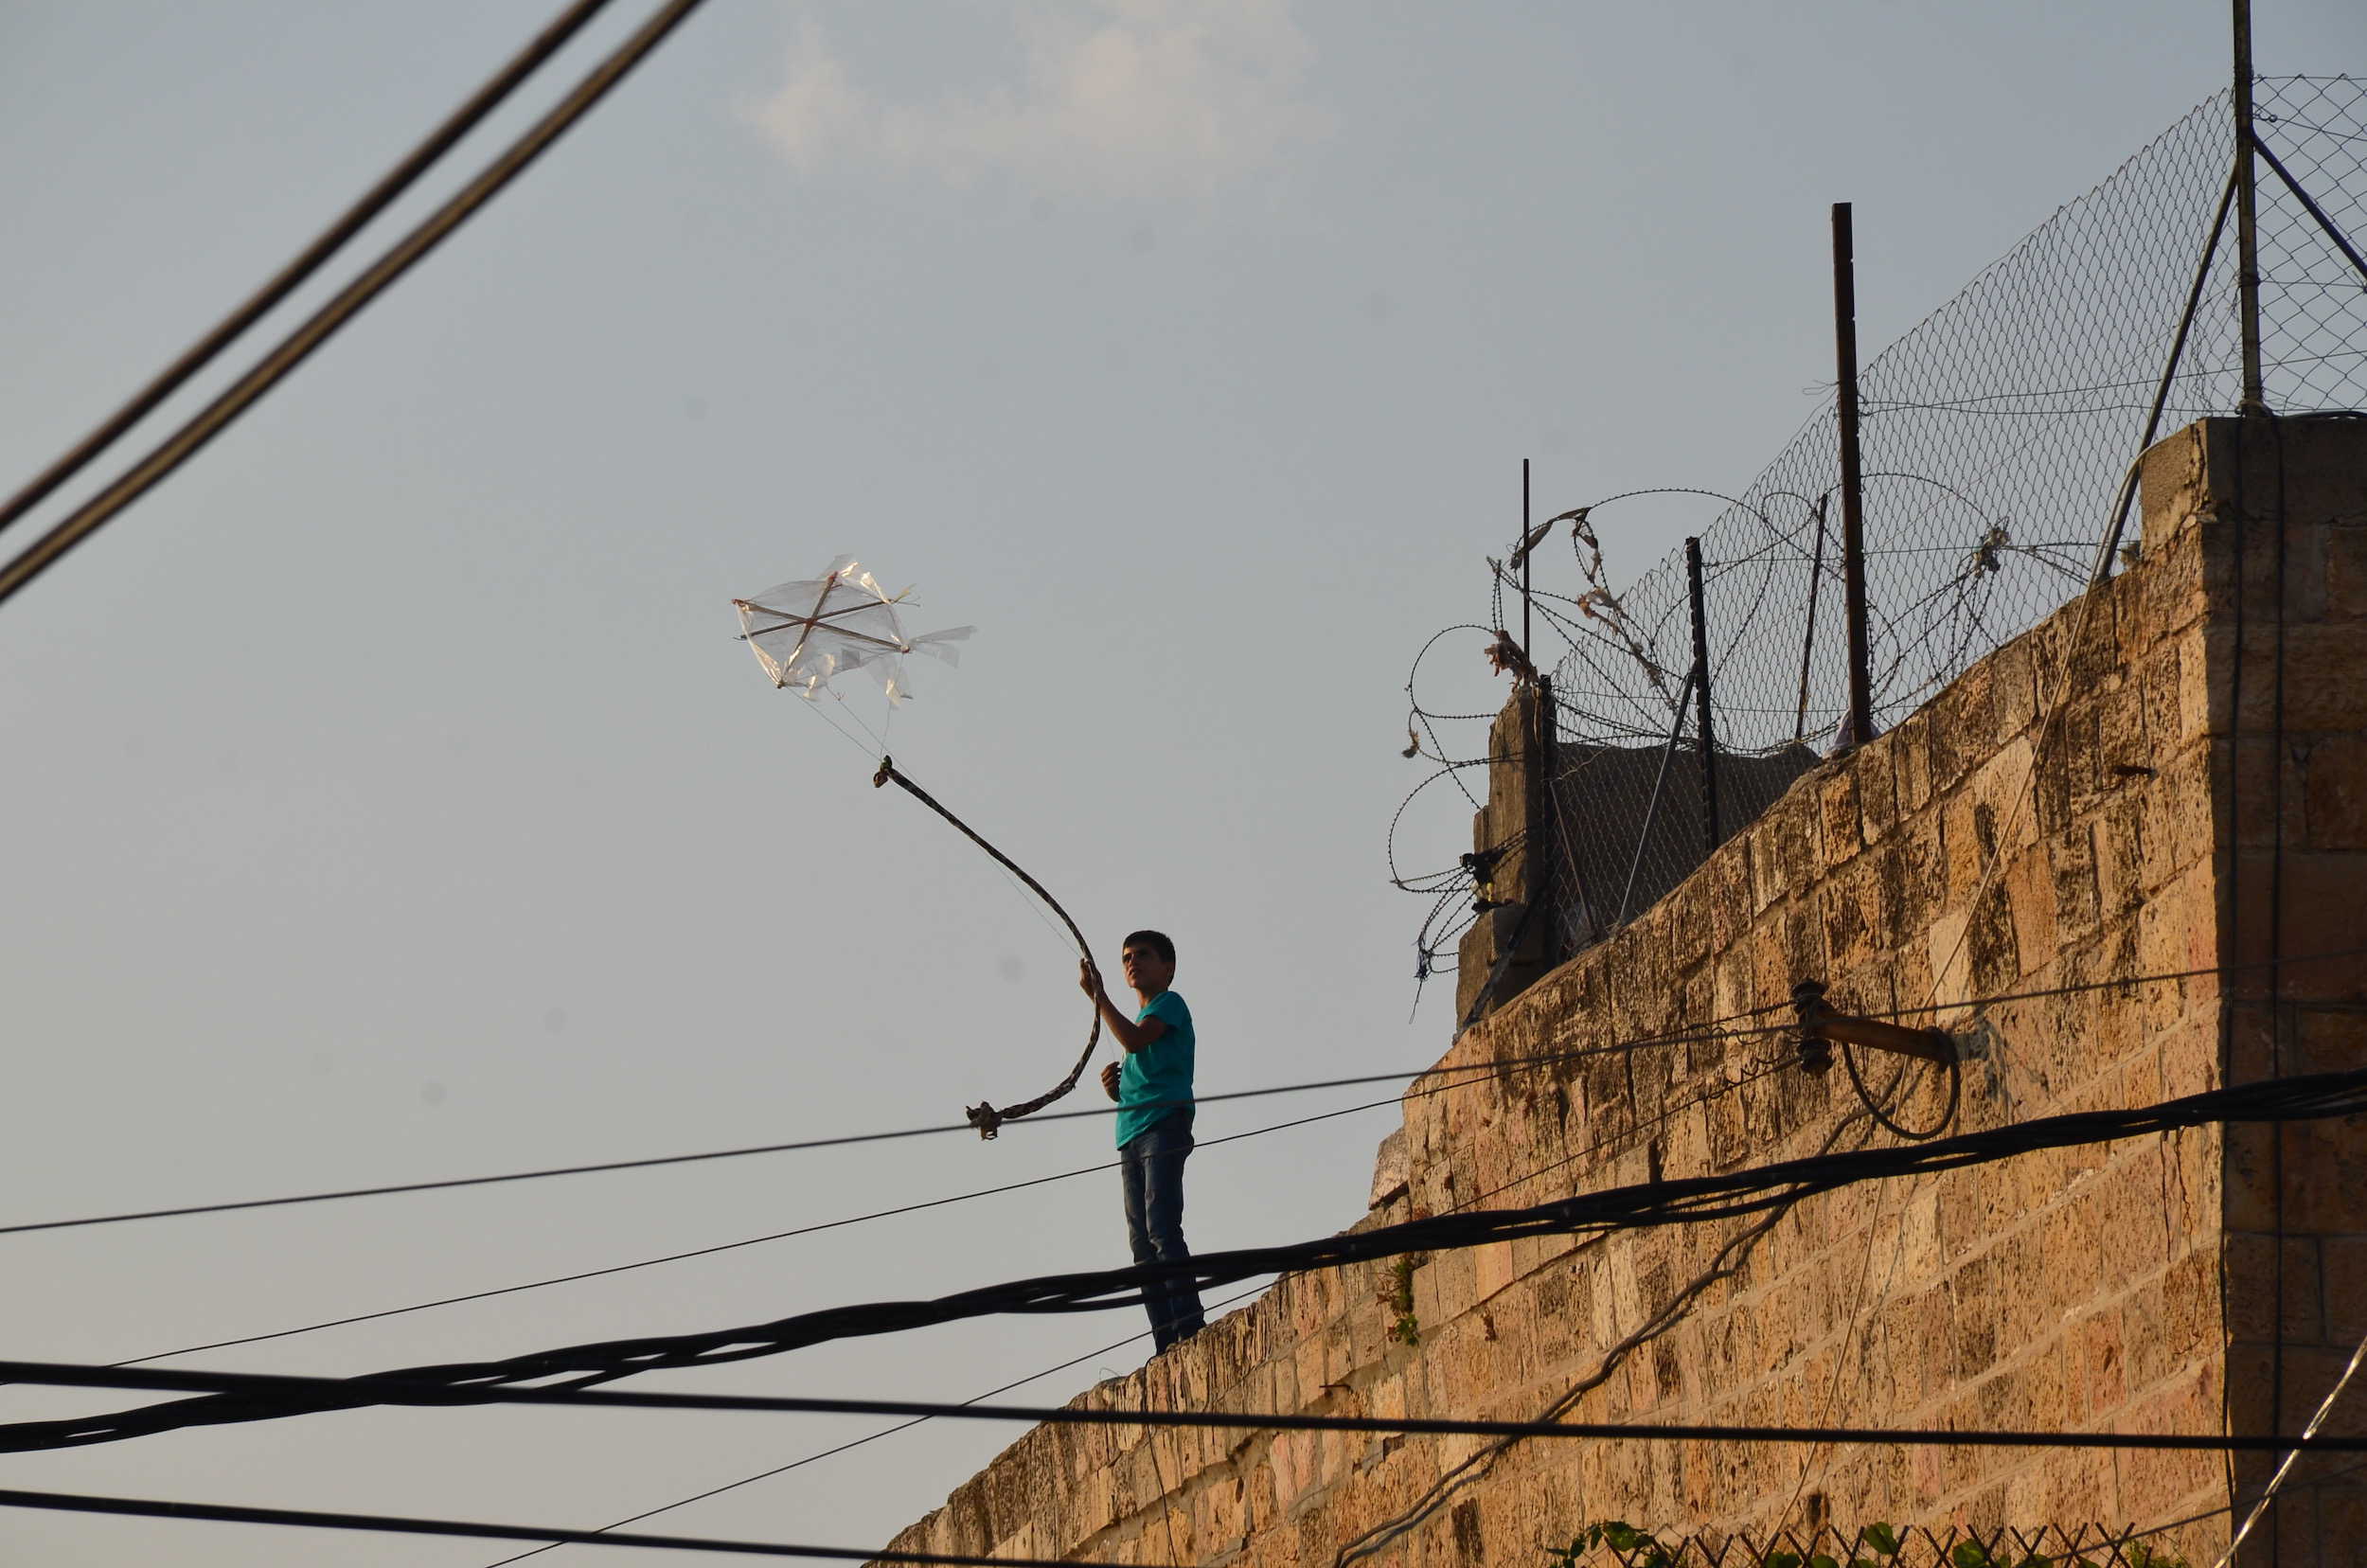 Boy flying a kite on a rooftop in the Old City in Hebron, Palestine